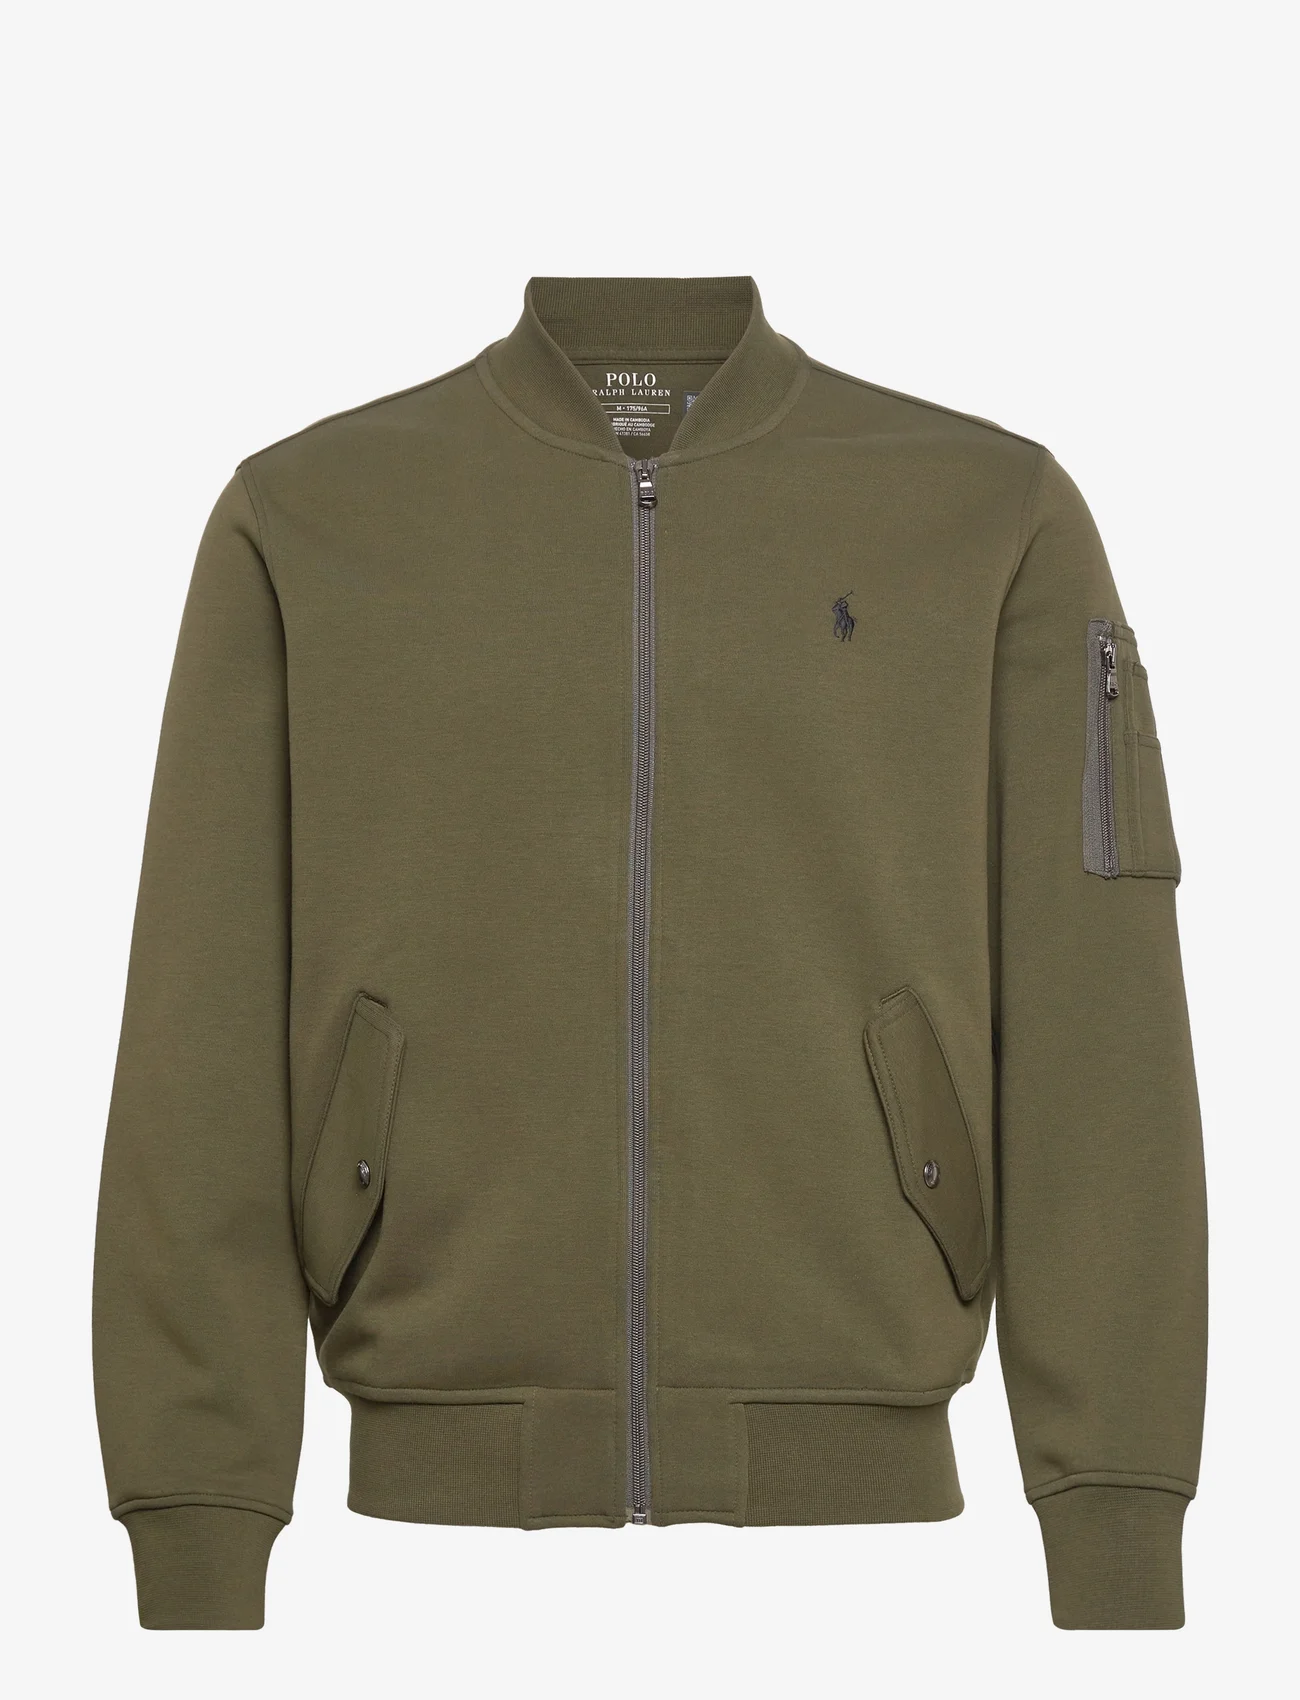 Polo Ralph Lauren Double-knit Bomber Jacket - 189 €. Buy Bomber Jackets  from Polo Ralph Lauren online at . Fast delivery and easy returns